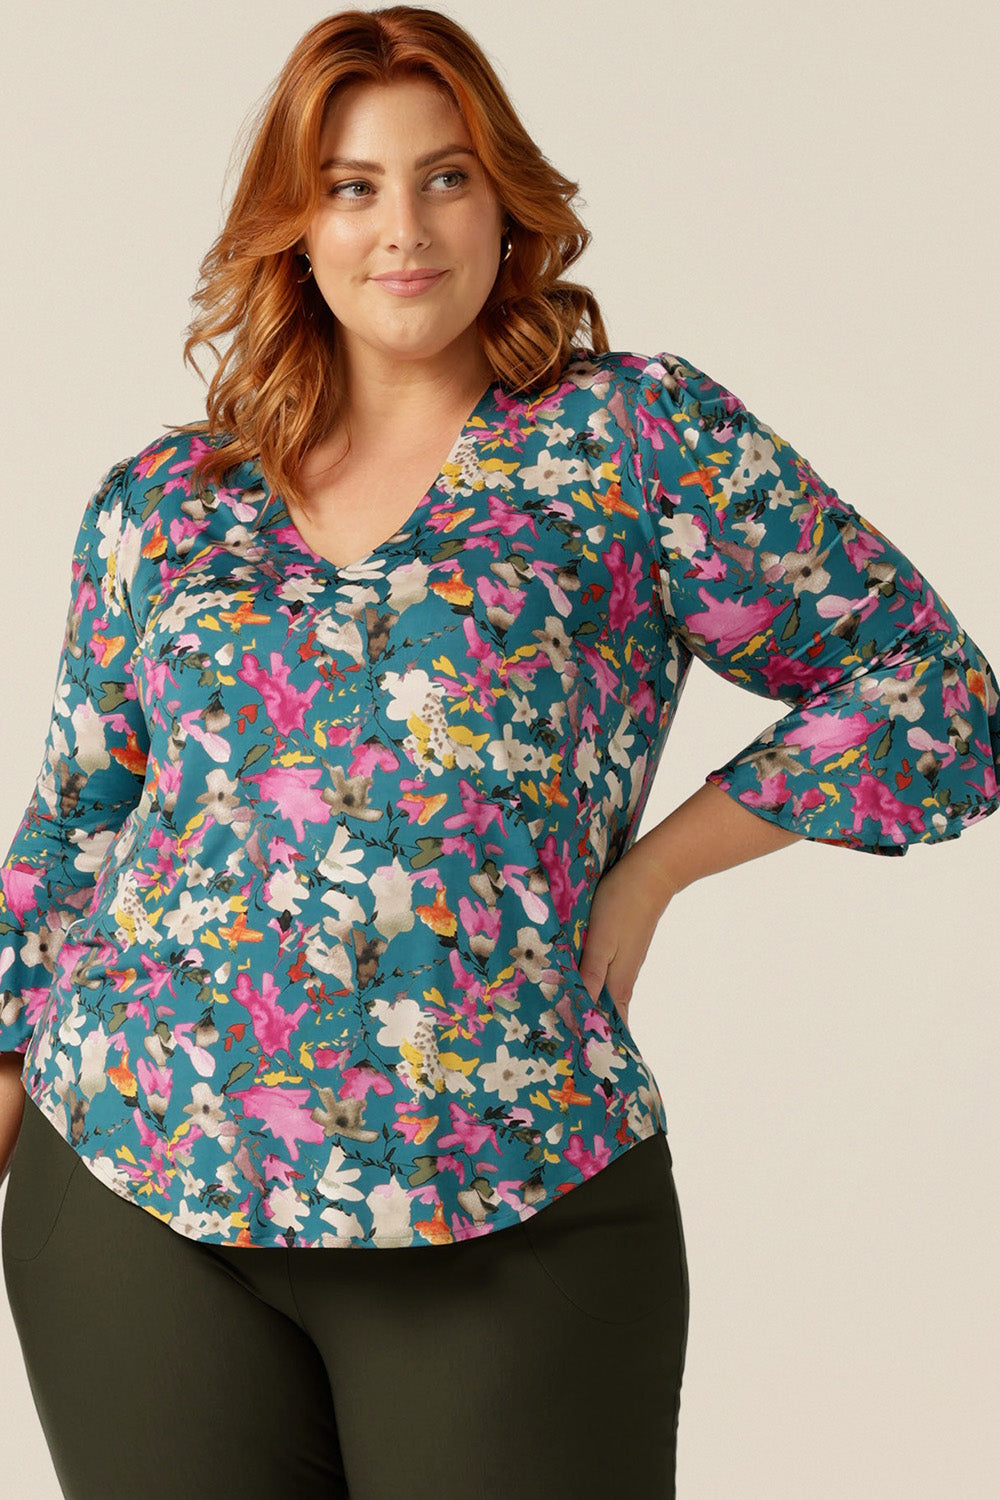 a size 18 curvy woman wearing a semi-fitted jersey top. The top features 3/4 sleeves with fluted cuffs, a V-neck and  a floral print. The top was made in Australia in petite to plus sizes by women's clothing brand, Leina and Fleura size 18 curvy woman wearing a semi-fitted jersey top. The top features 3/4 sleeves with fluted cuffs, a V-neck and  a floral print. The top was made in Australia in petite to plus sizes by women's clothing brand, Leina and Fleur